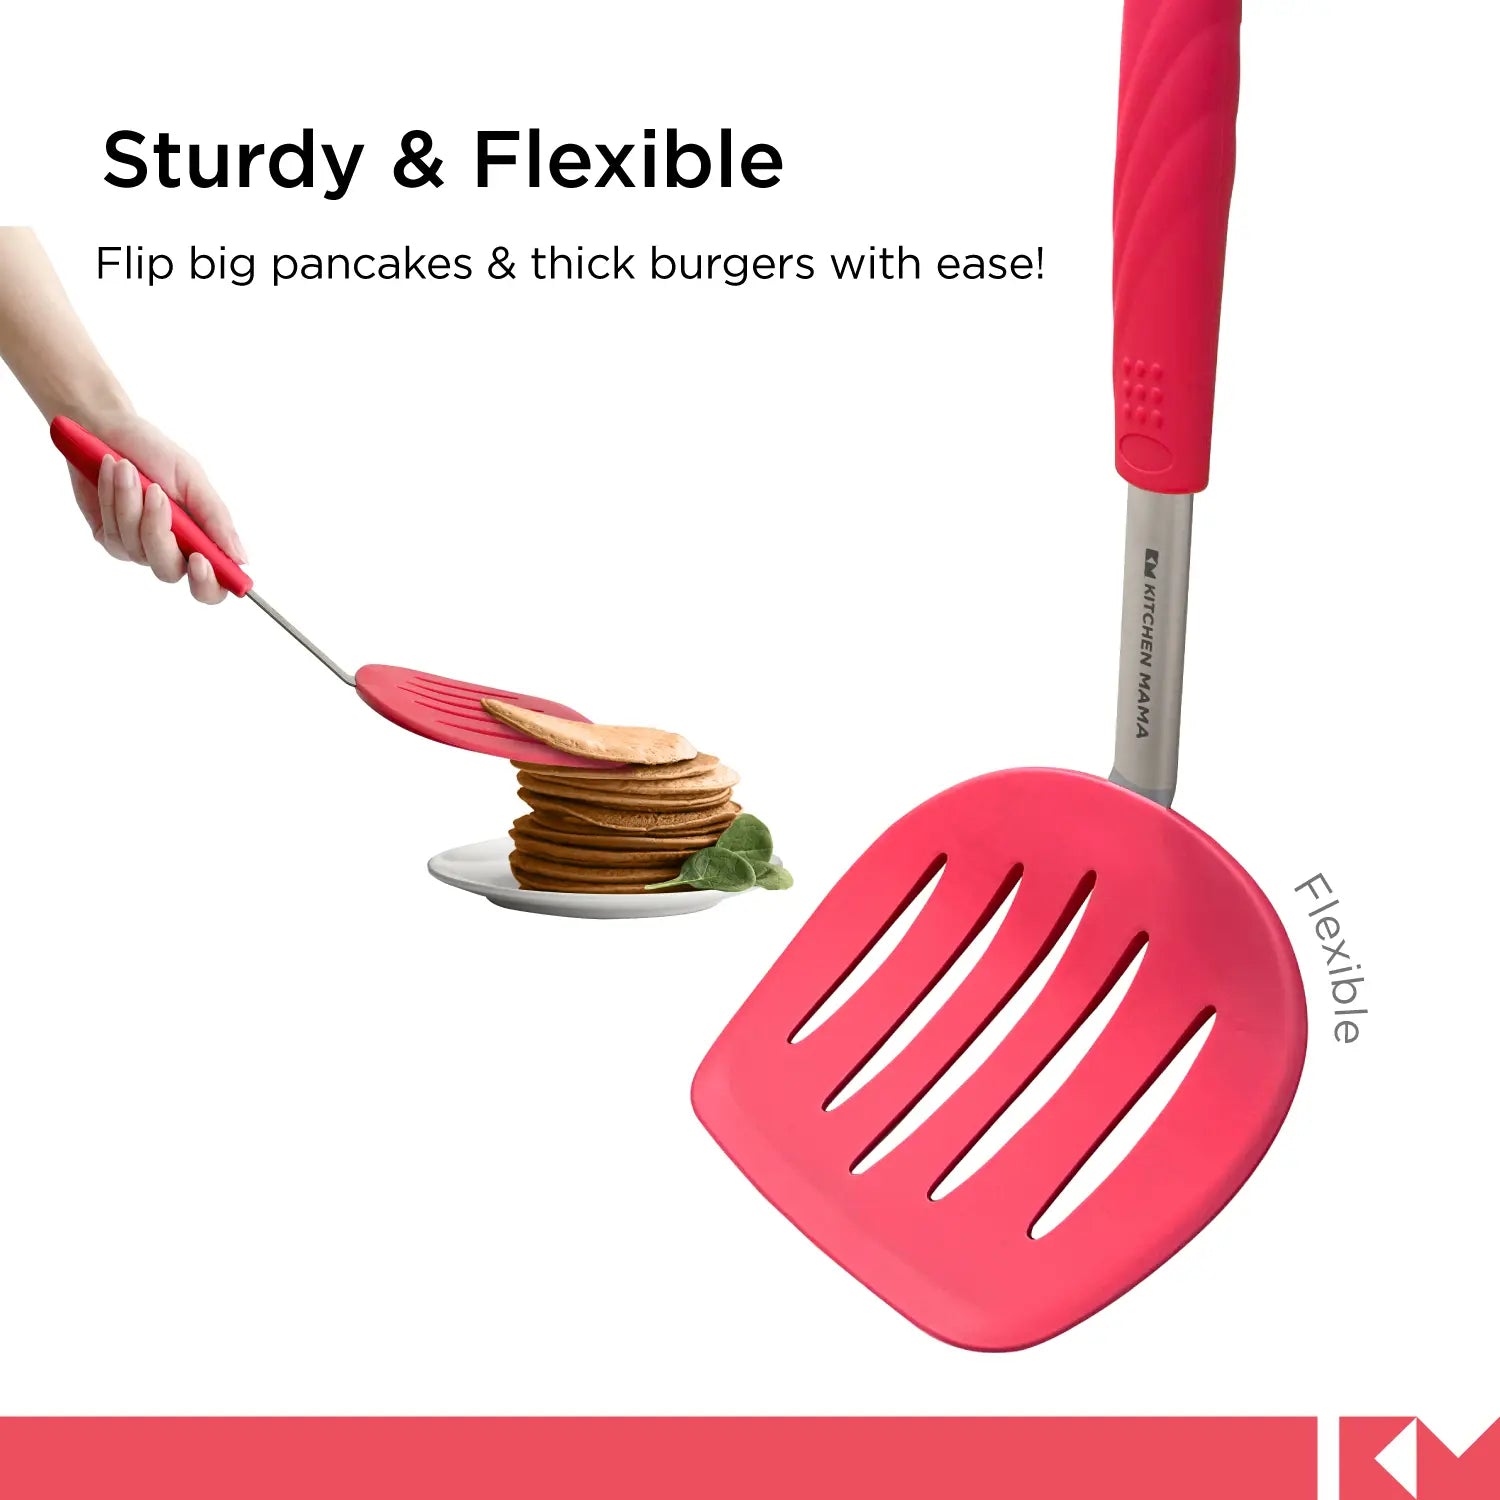 Platinum Silicone Pancake Turner - Heat-Resistant Wide & Slotted Spatula, SP0510-R, sturdy and flexible, flip big pancakes and thick burgers with ease